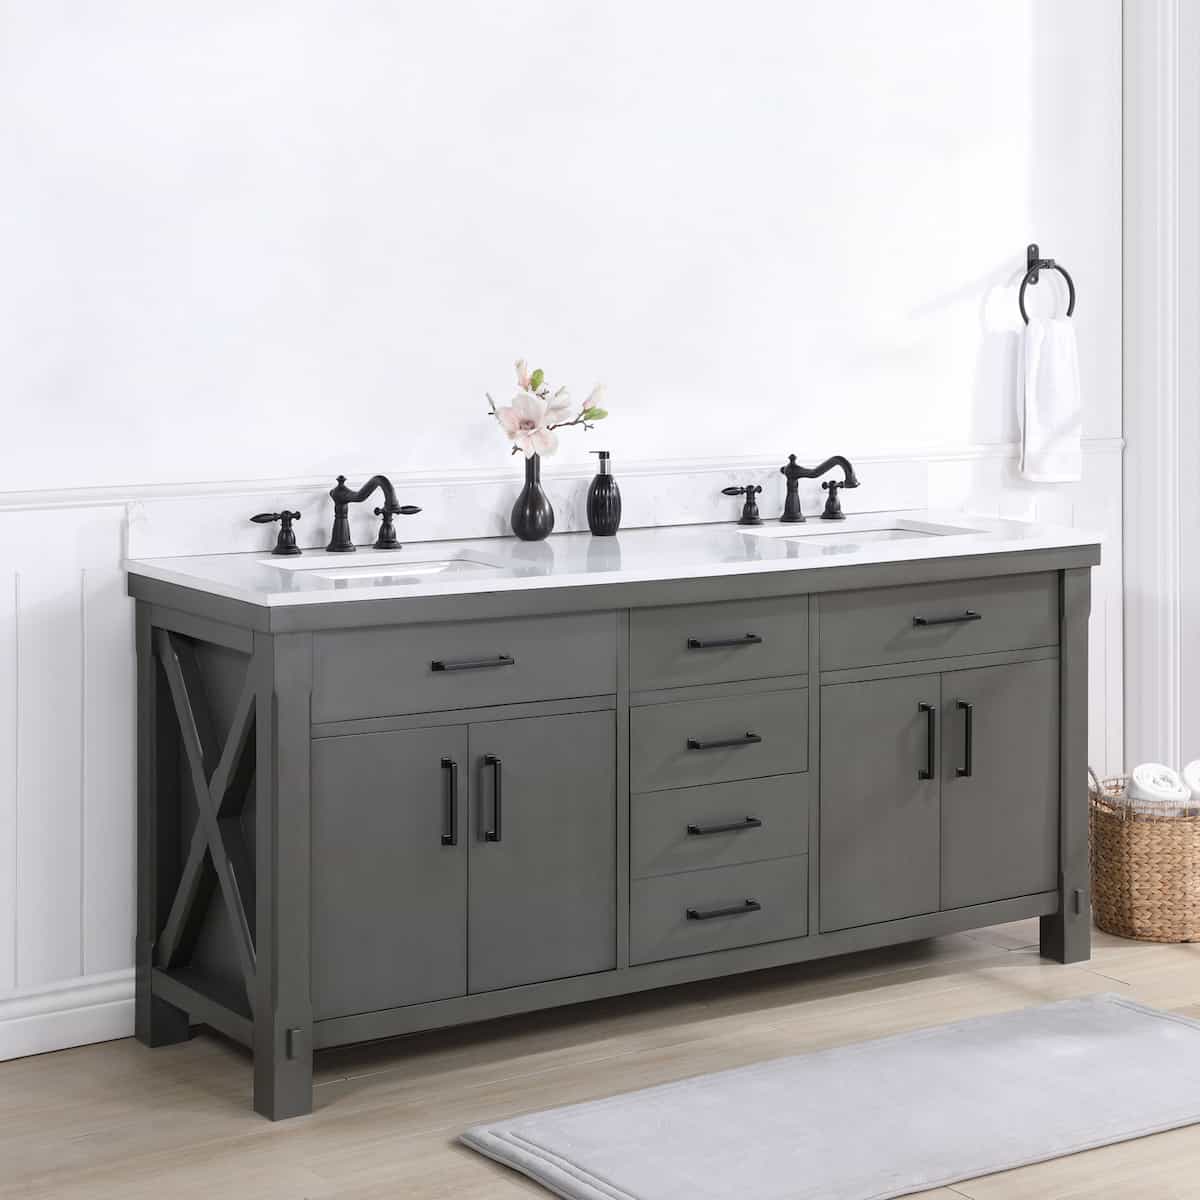 Vinnova Viella 72 Inch Freestanding Double Sink Bath Vanity in Rust Grey Finish with White Composite Countertop Without Mirror Side 701872-RU-WS-NM